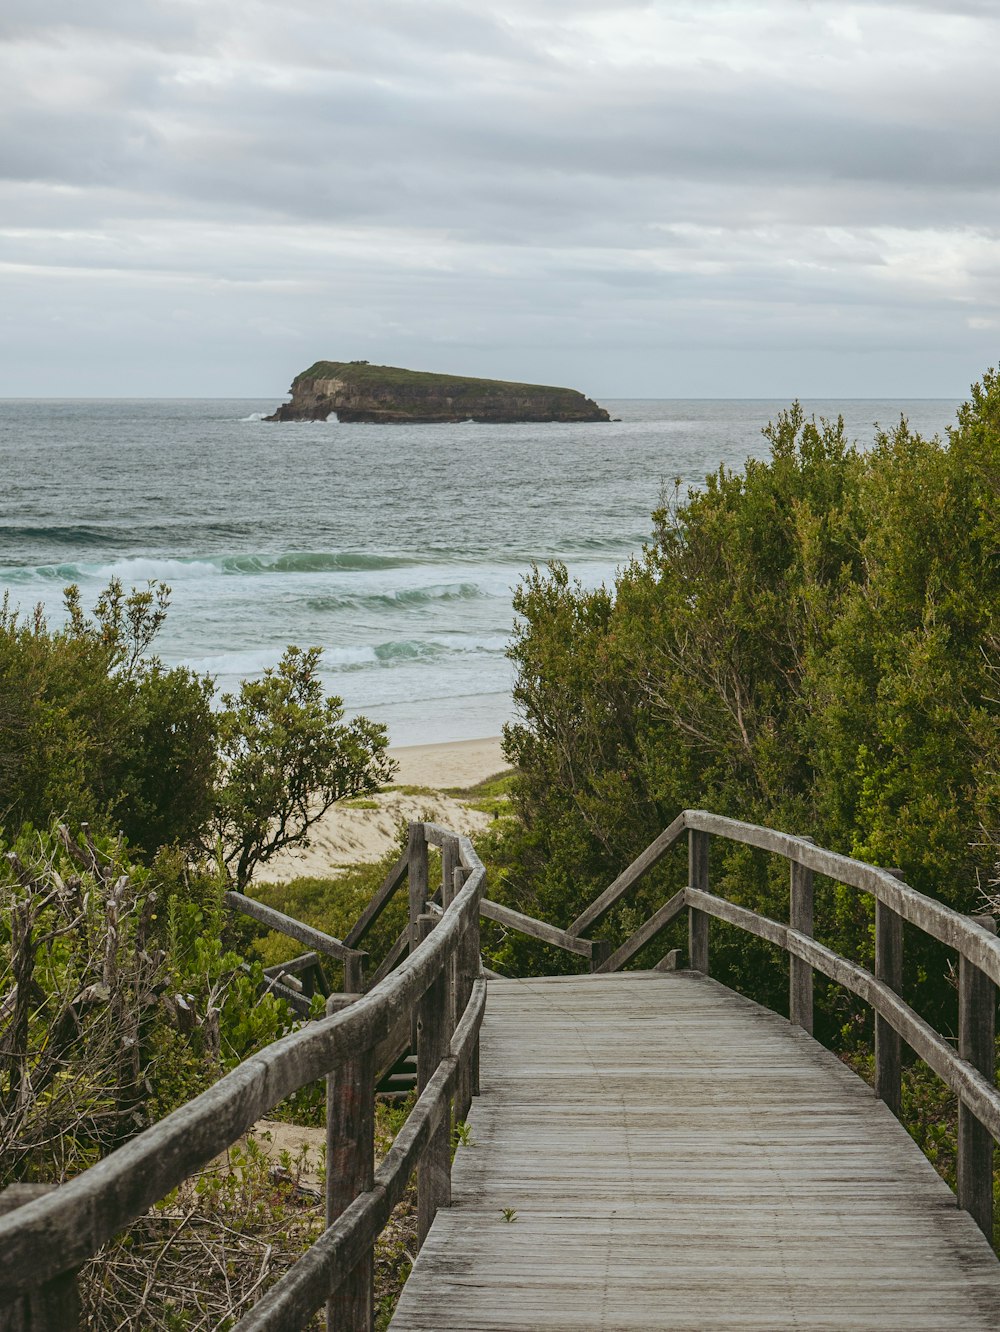 a wooden walkway leading to a beach with a small island in the distance